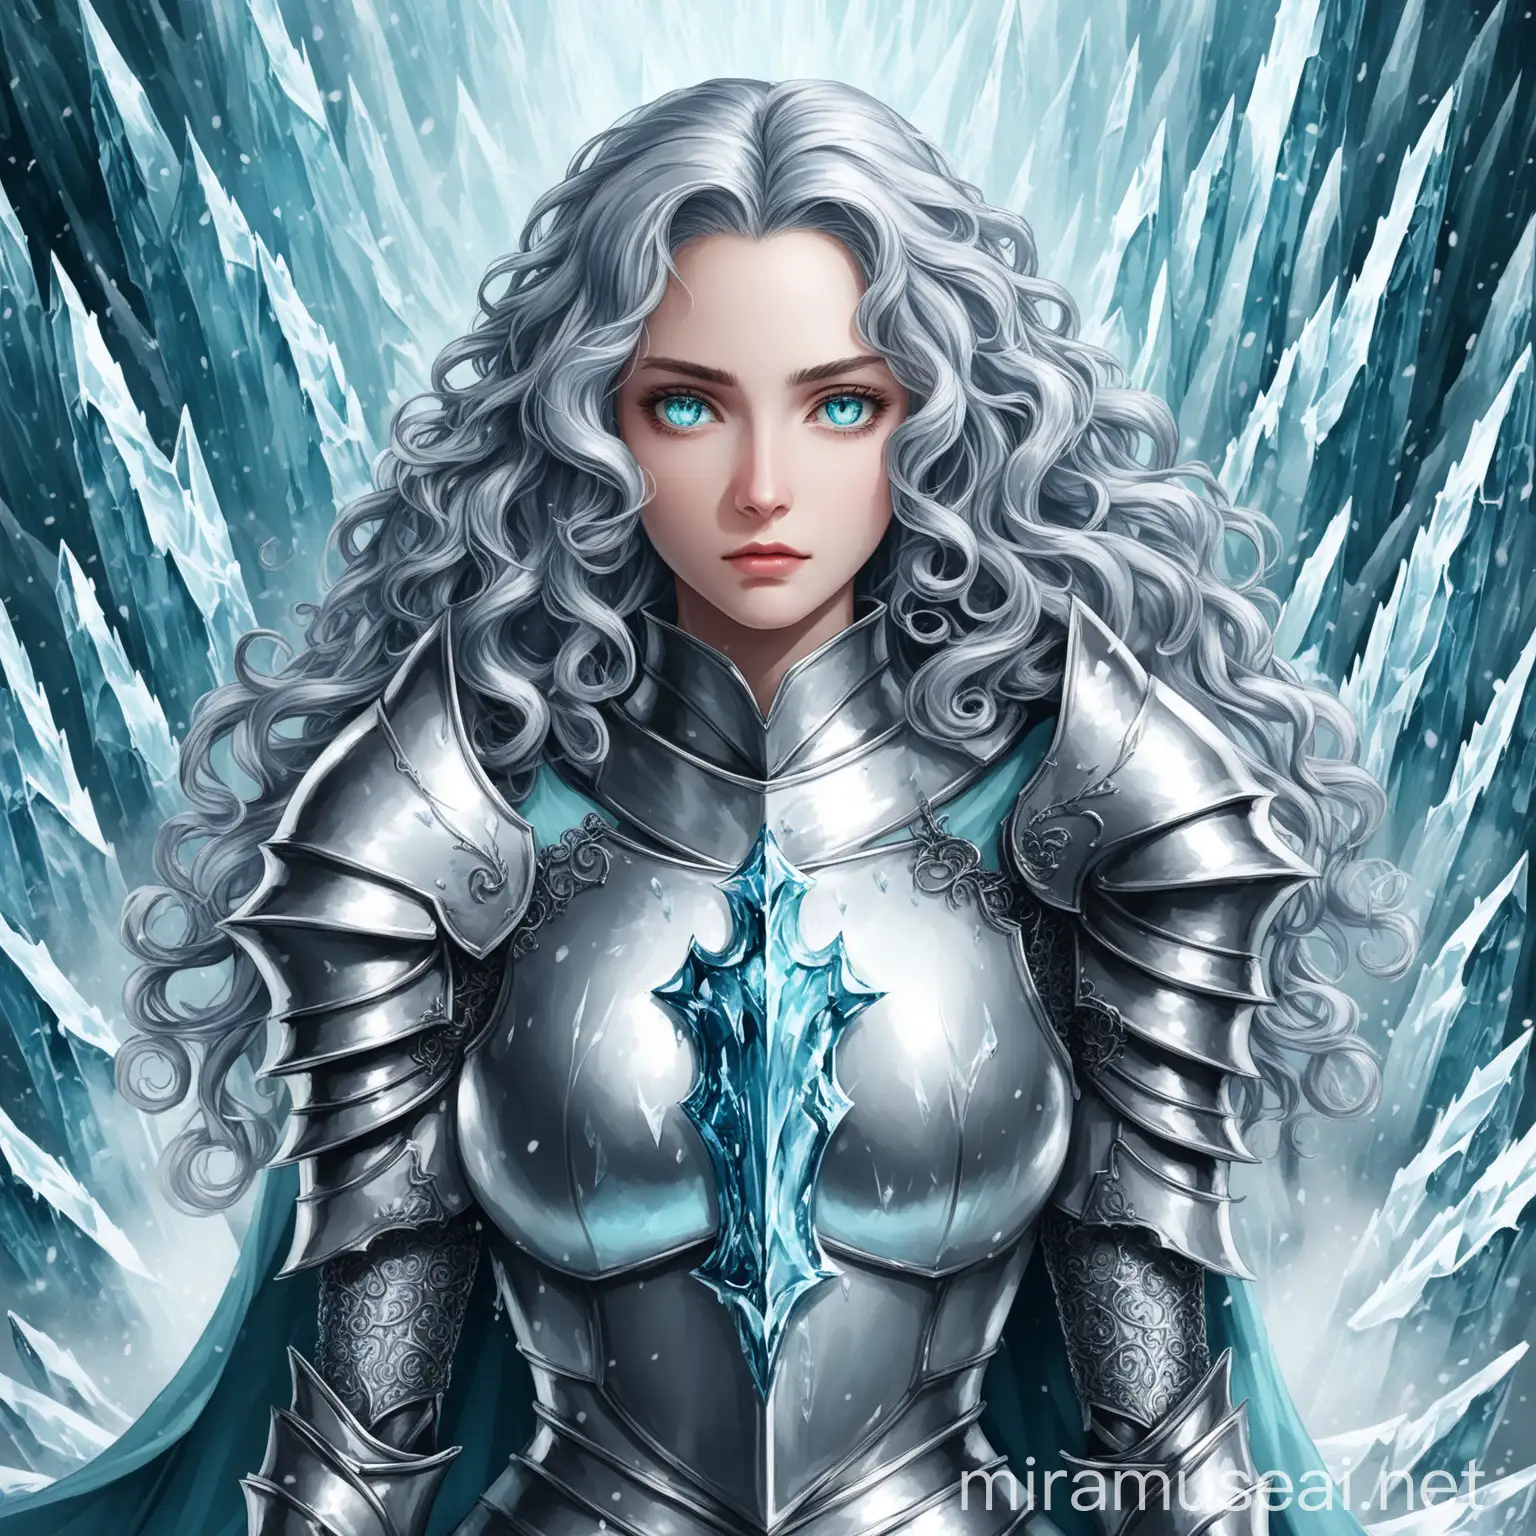 Knight Woman with Curly Silver Hair in Ice Cold Background